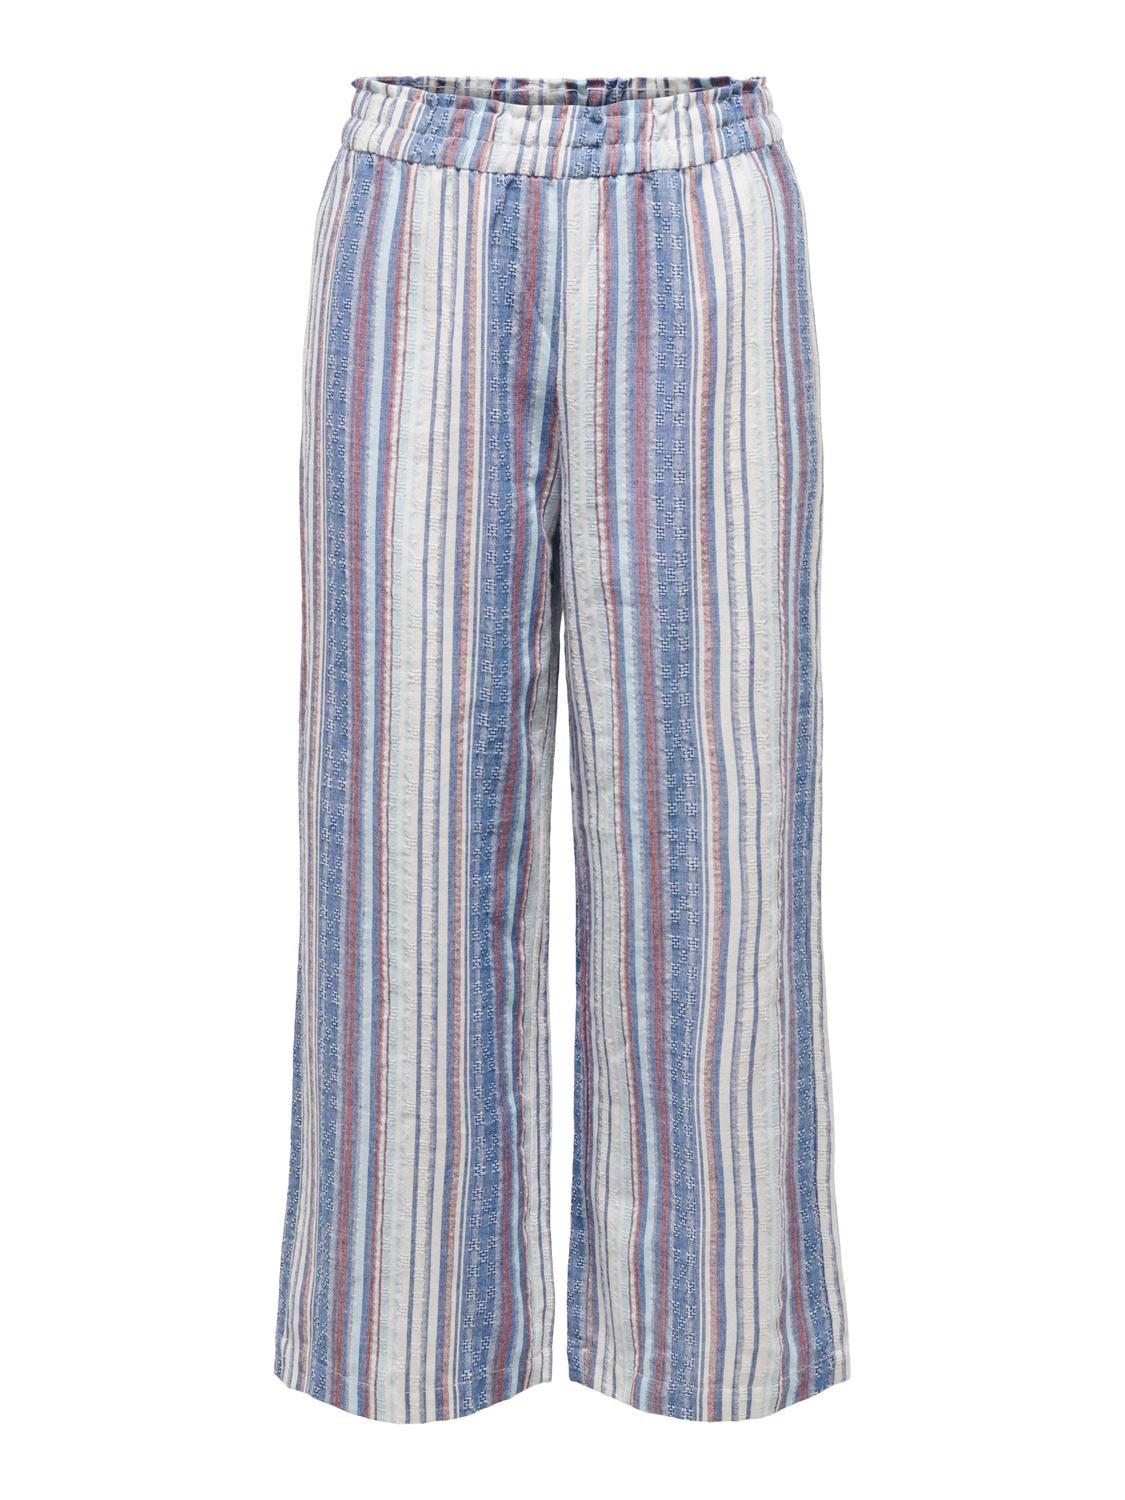 ONLY Mid Waist Culotte Pants -Dazzling Blue - 15291314